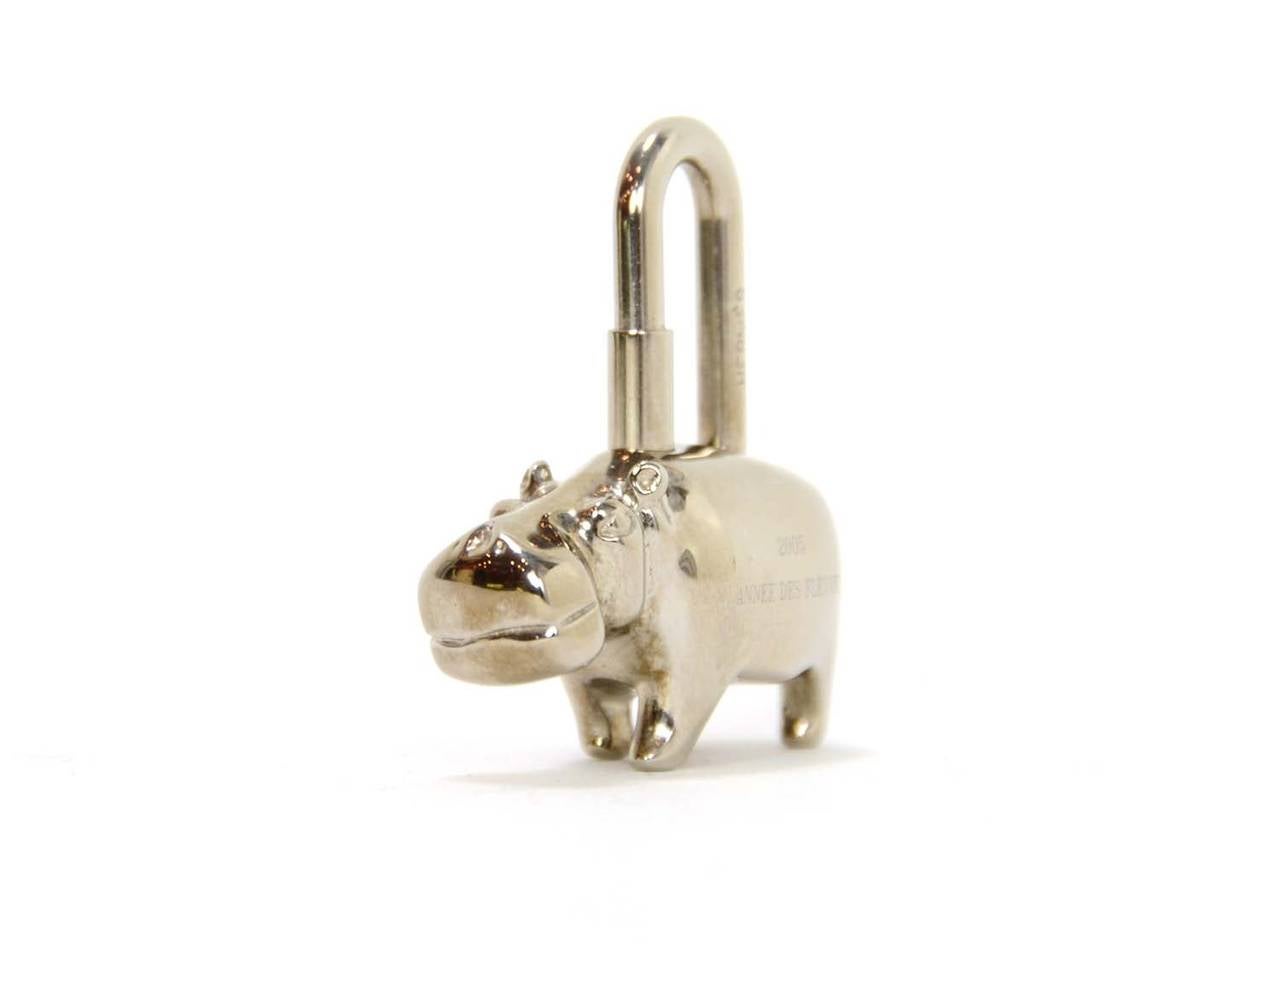 Hermes 2005 Silver Hippo Key Ring

    Made in: France
    Year of Production: 2005
    Stamp: 2005 Anne Des Fleuves
    Closure: Screw on
    Color: Silver
    Materials: Silver
    Overall Condition: Excellent with no signs of wear or